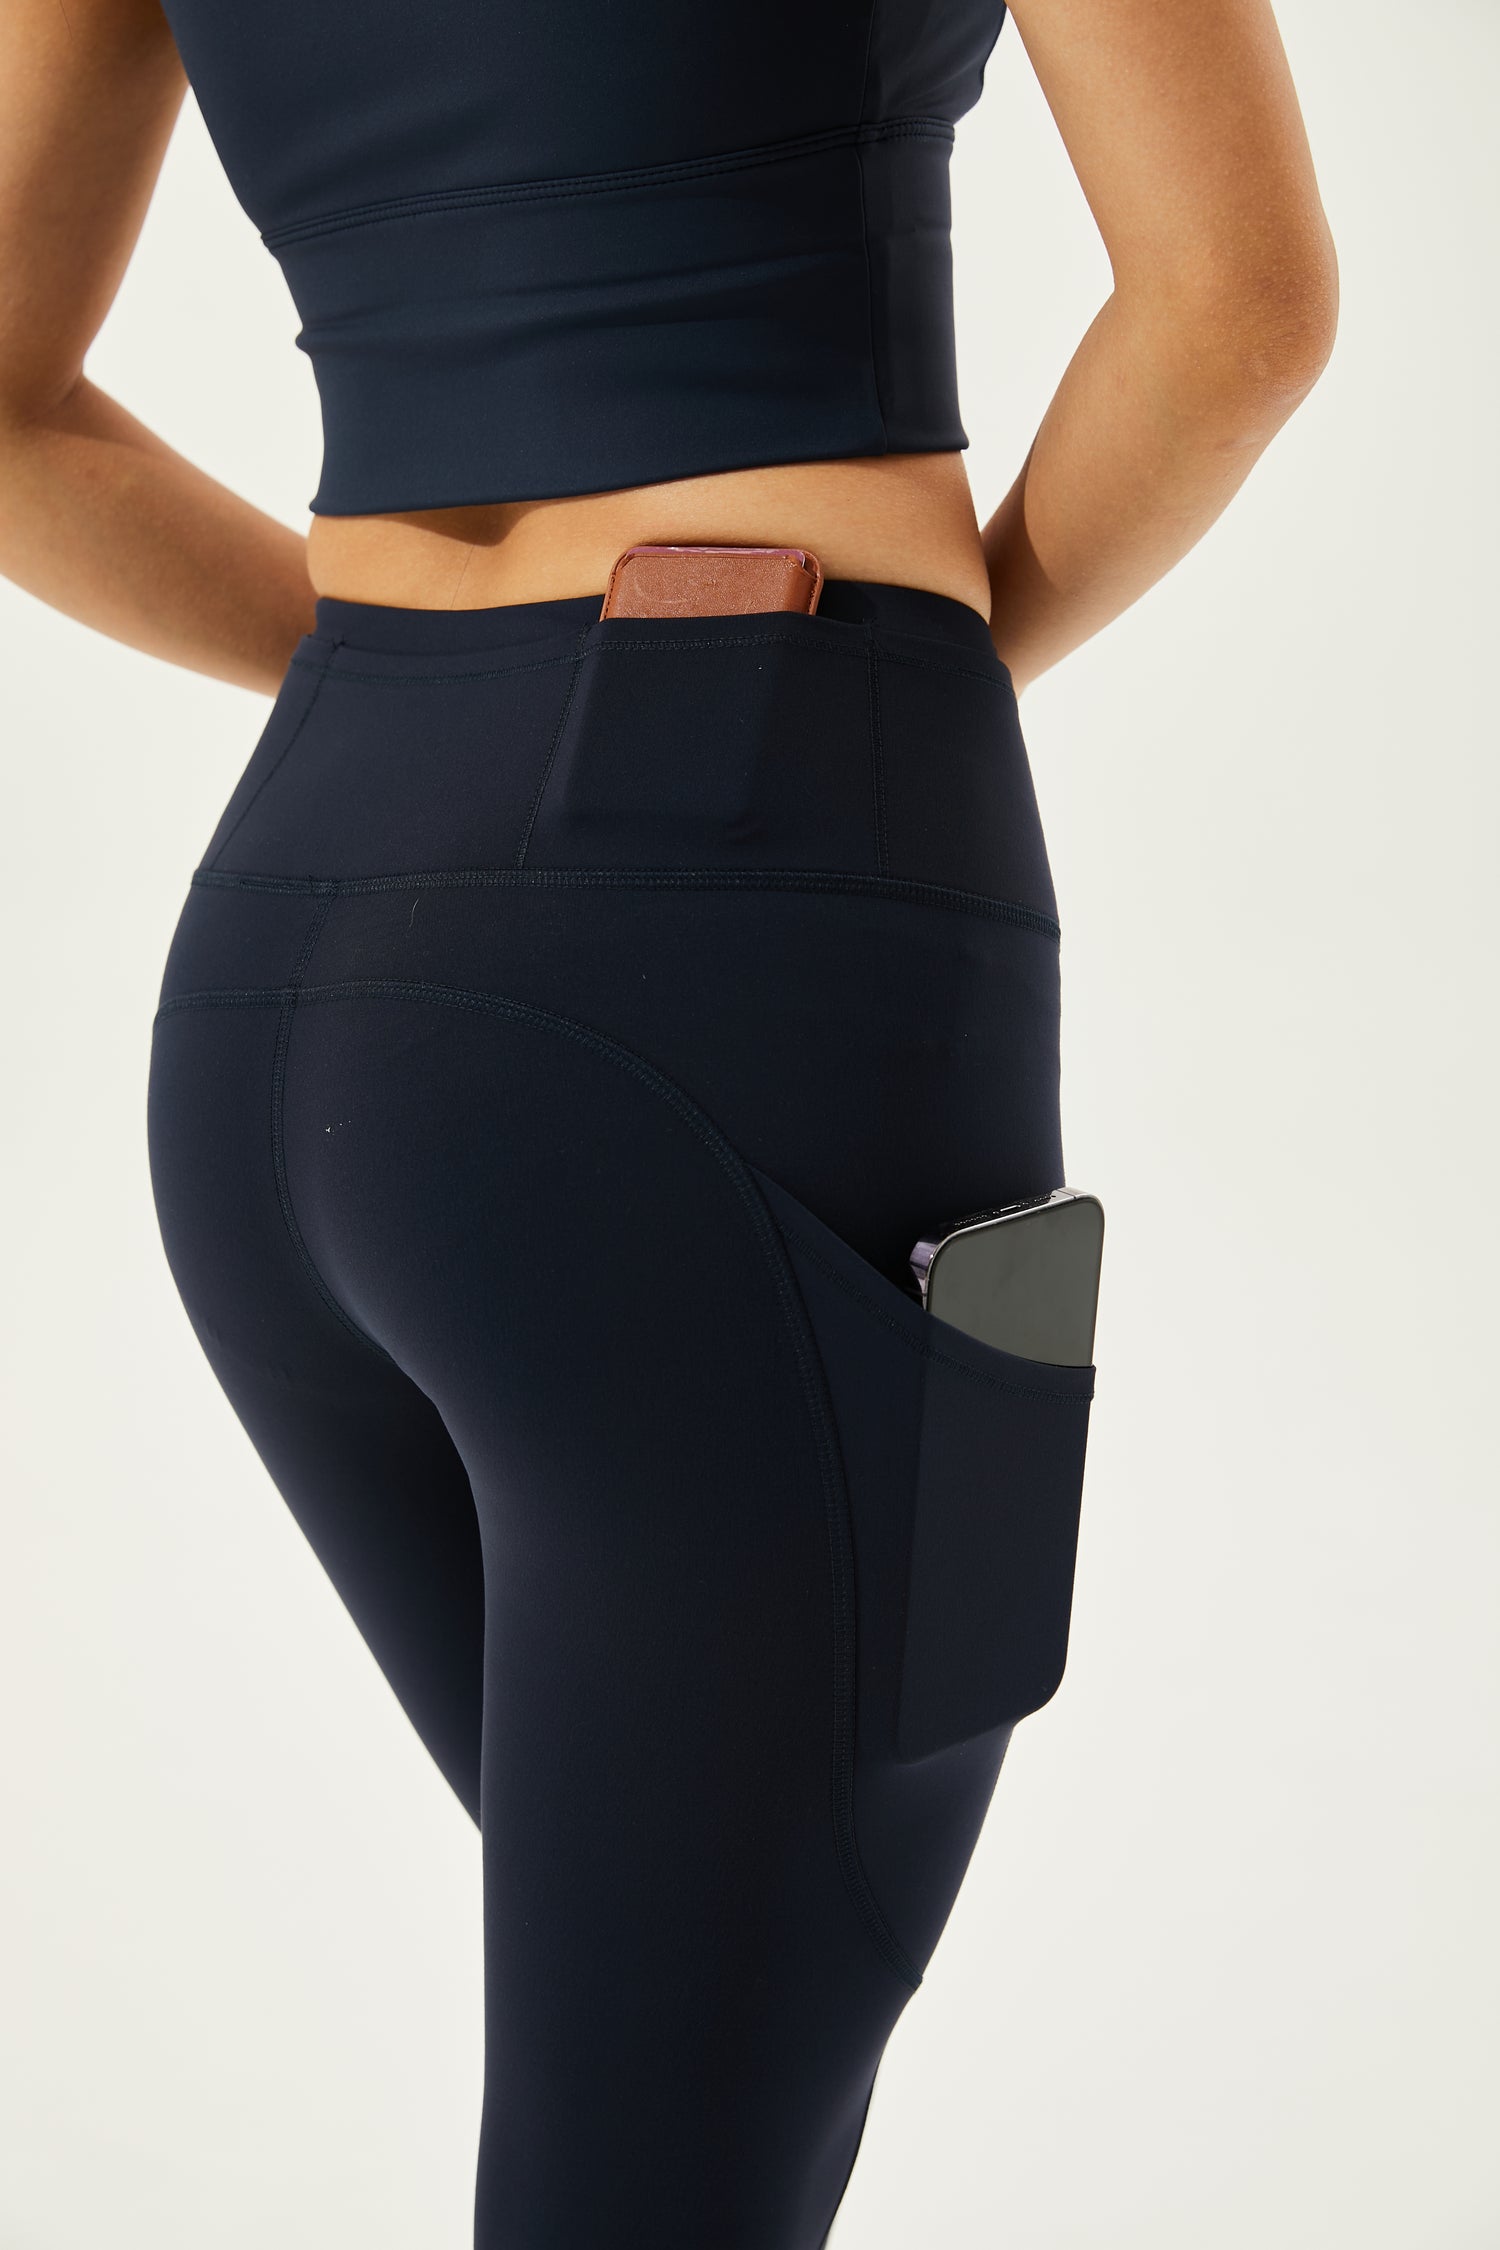 🚀 Have you explored our high-waist, tummy controlling, camel-toe proof  Buttersoft leggings? Find out why they are flying off the shelv